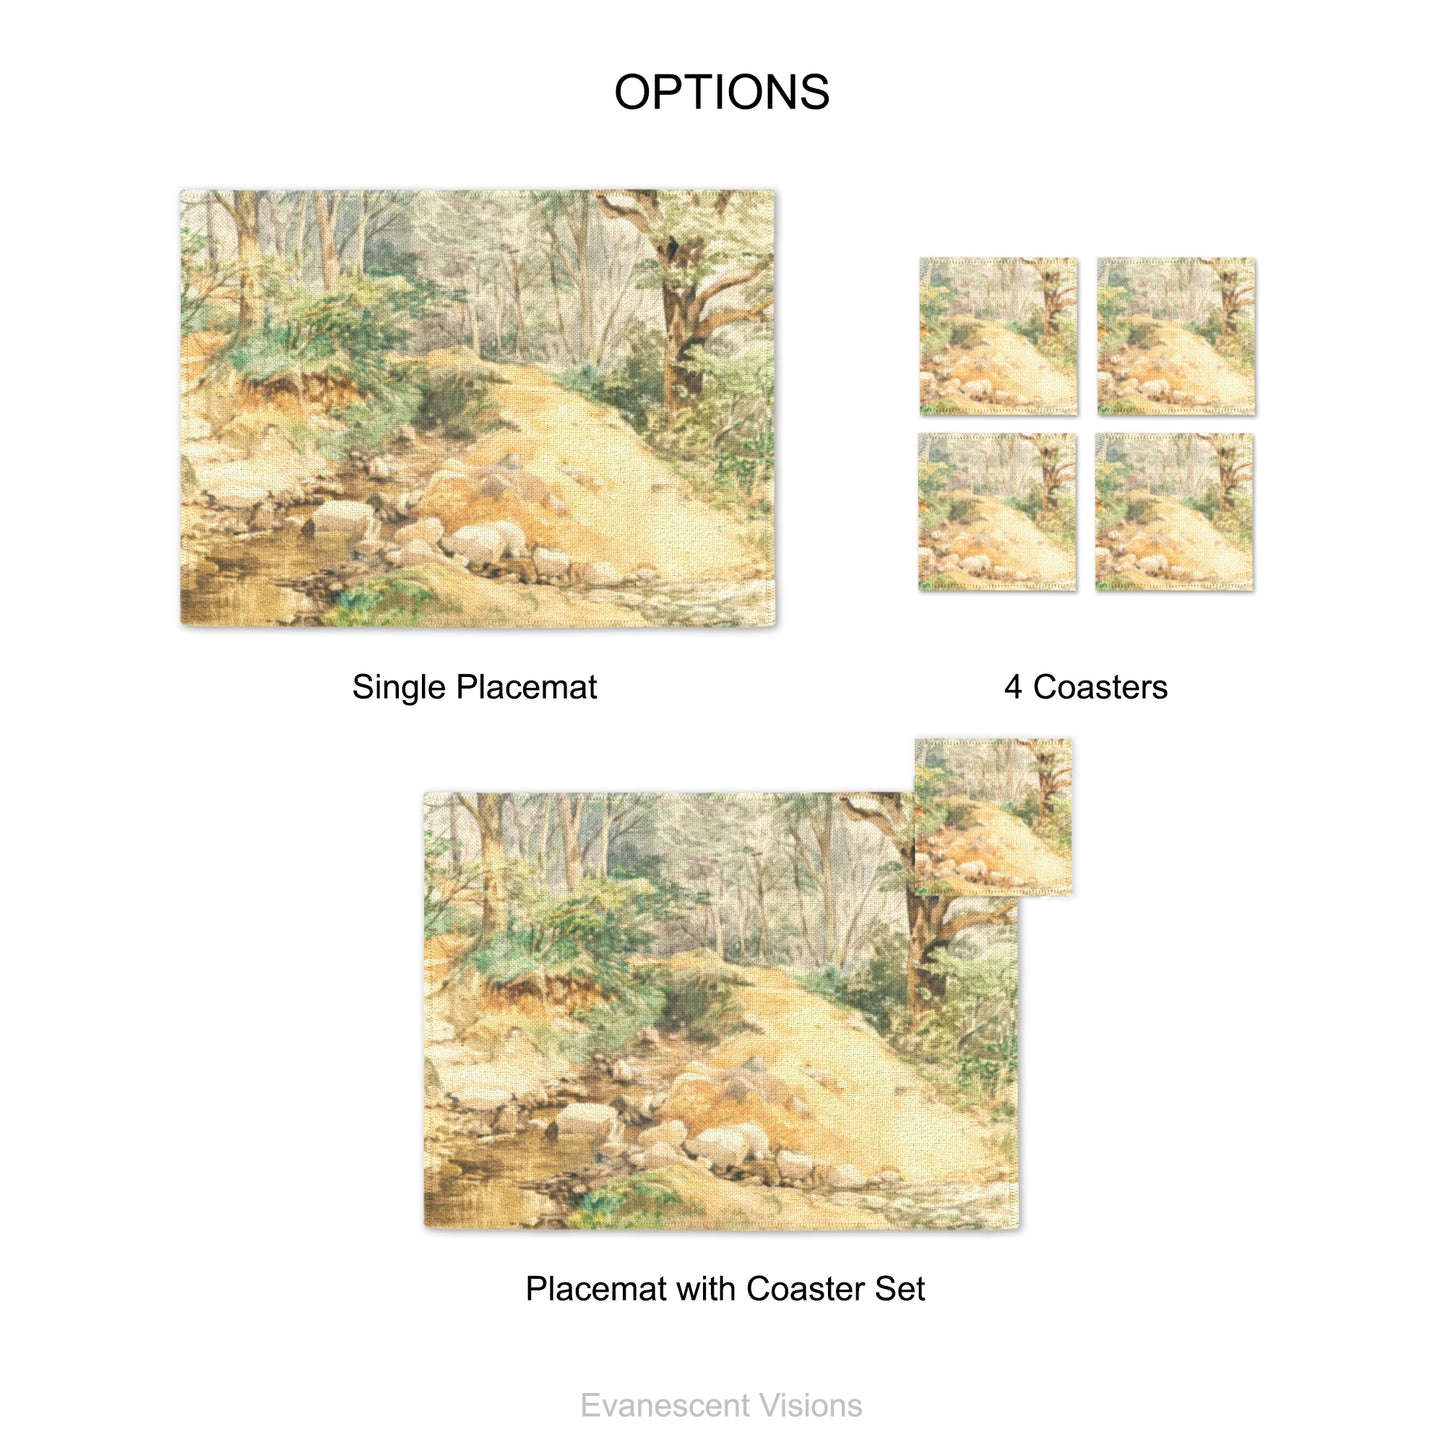 Product options shows single placemat, set of 4 coasters and placemat with coaster set. Design is from artwork 'Woodland Scene with a Path Across a Stream' by John Middleton (1827–1856)